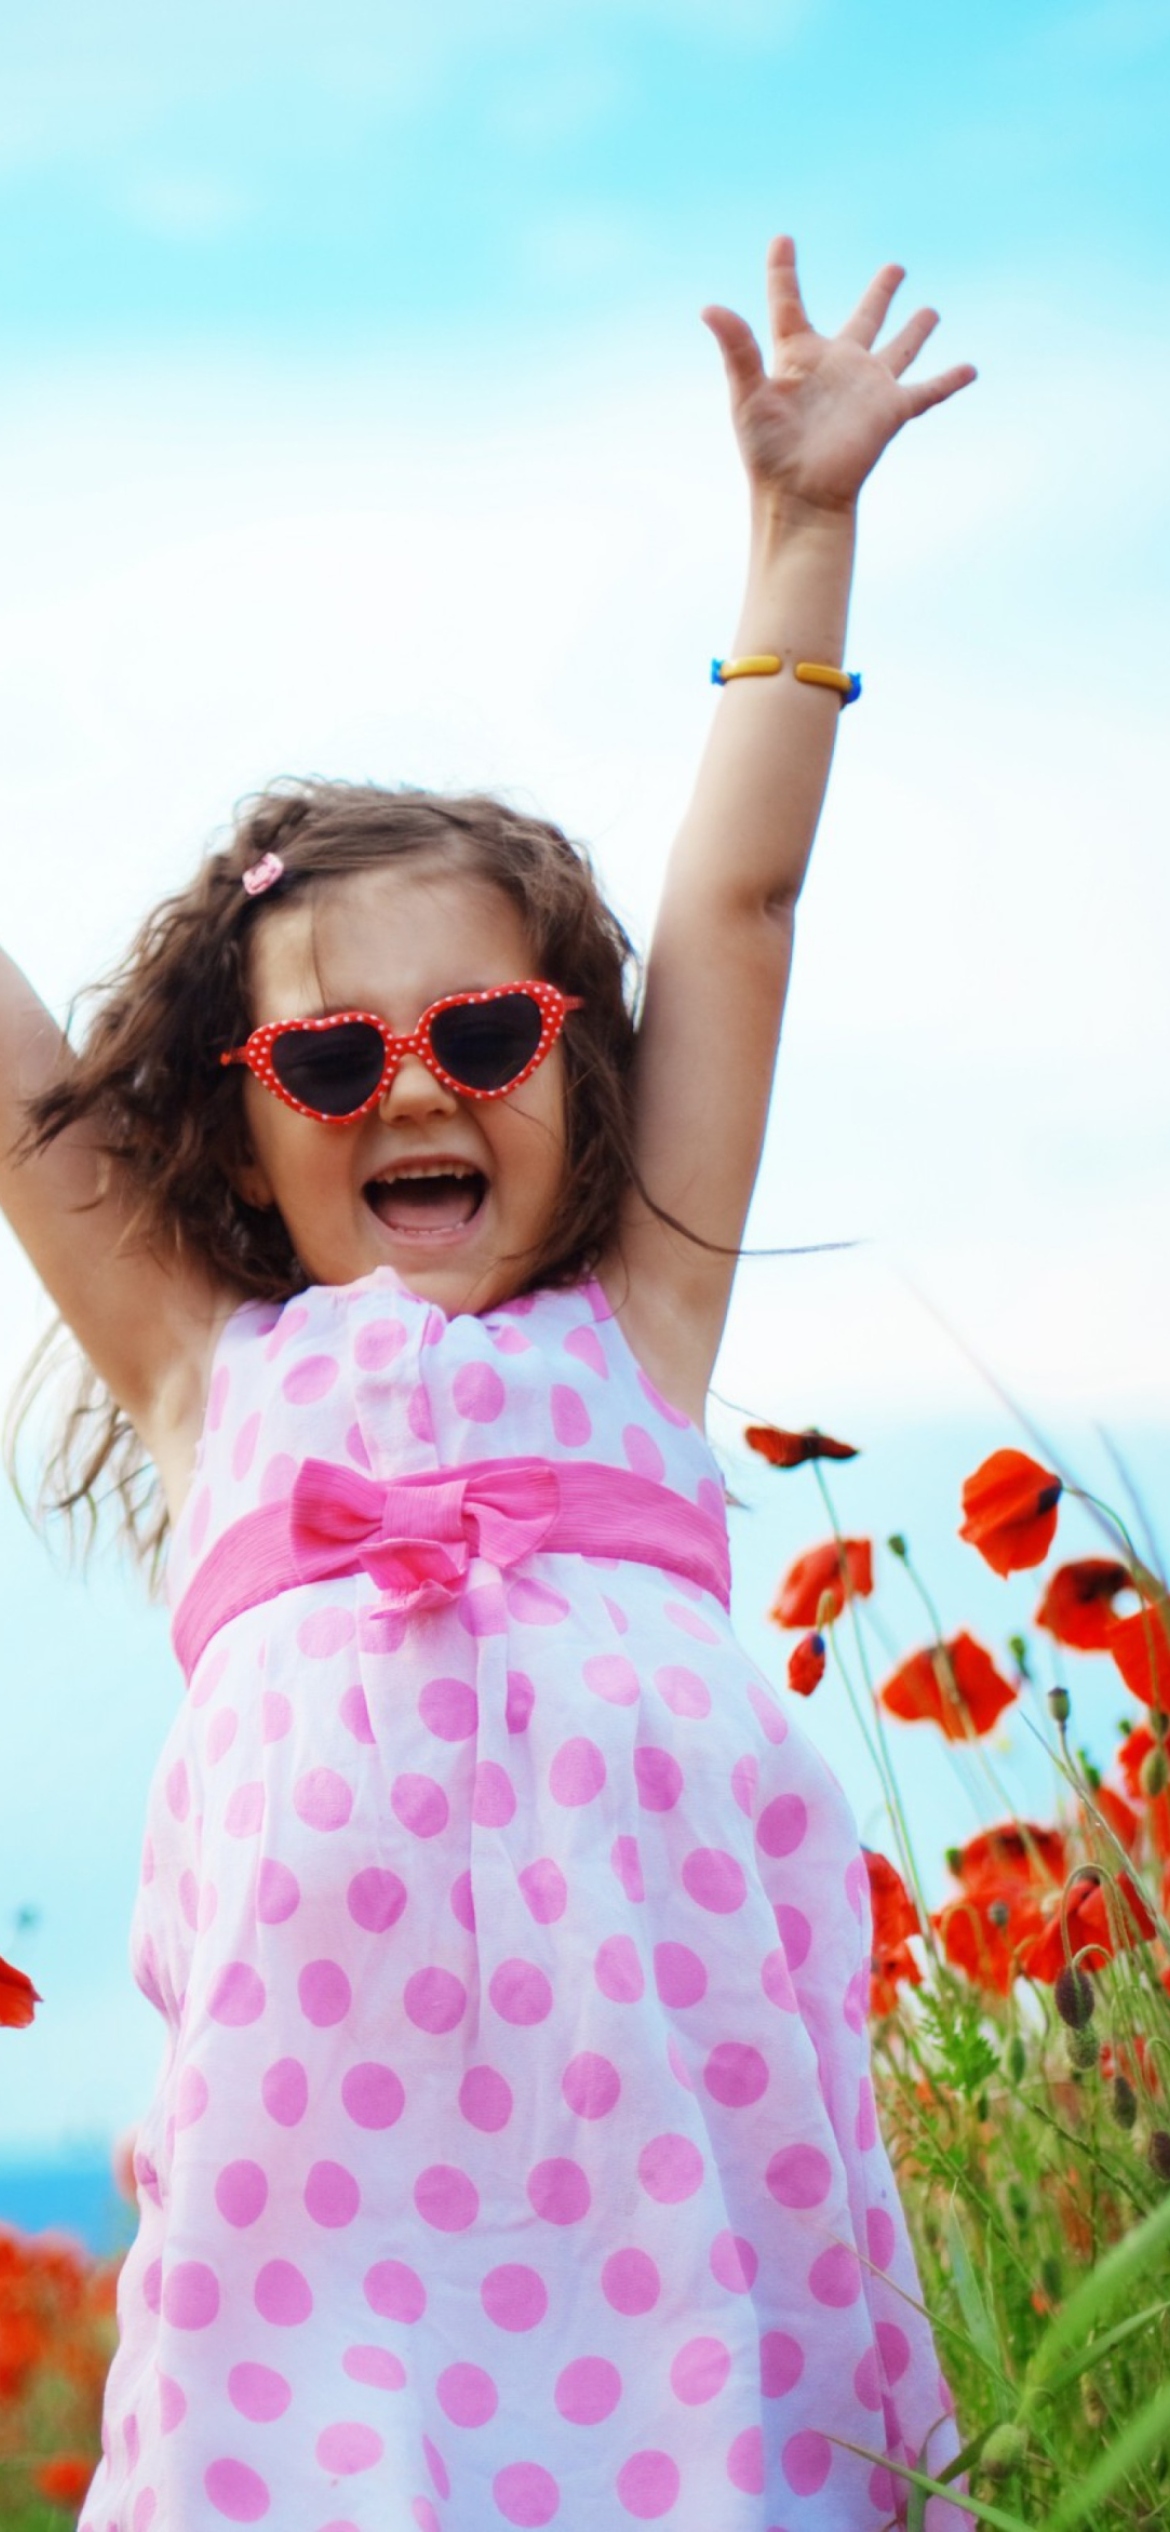 Happy Little Girl In Love With Life wallpaper 1170x2532